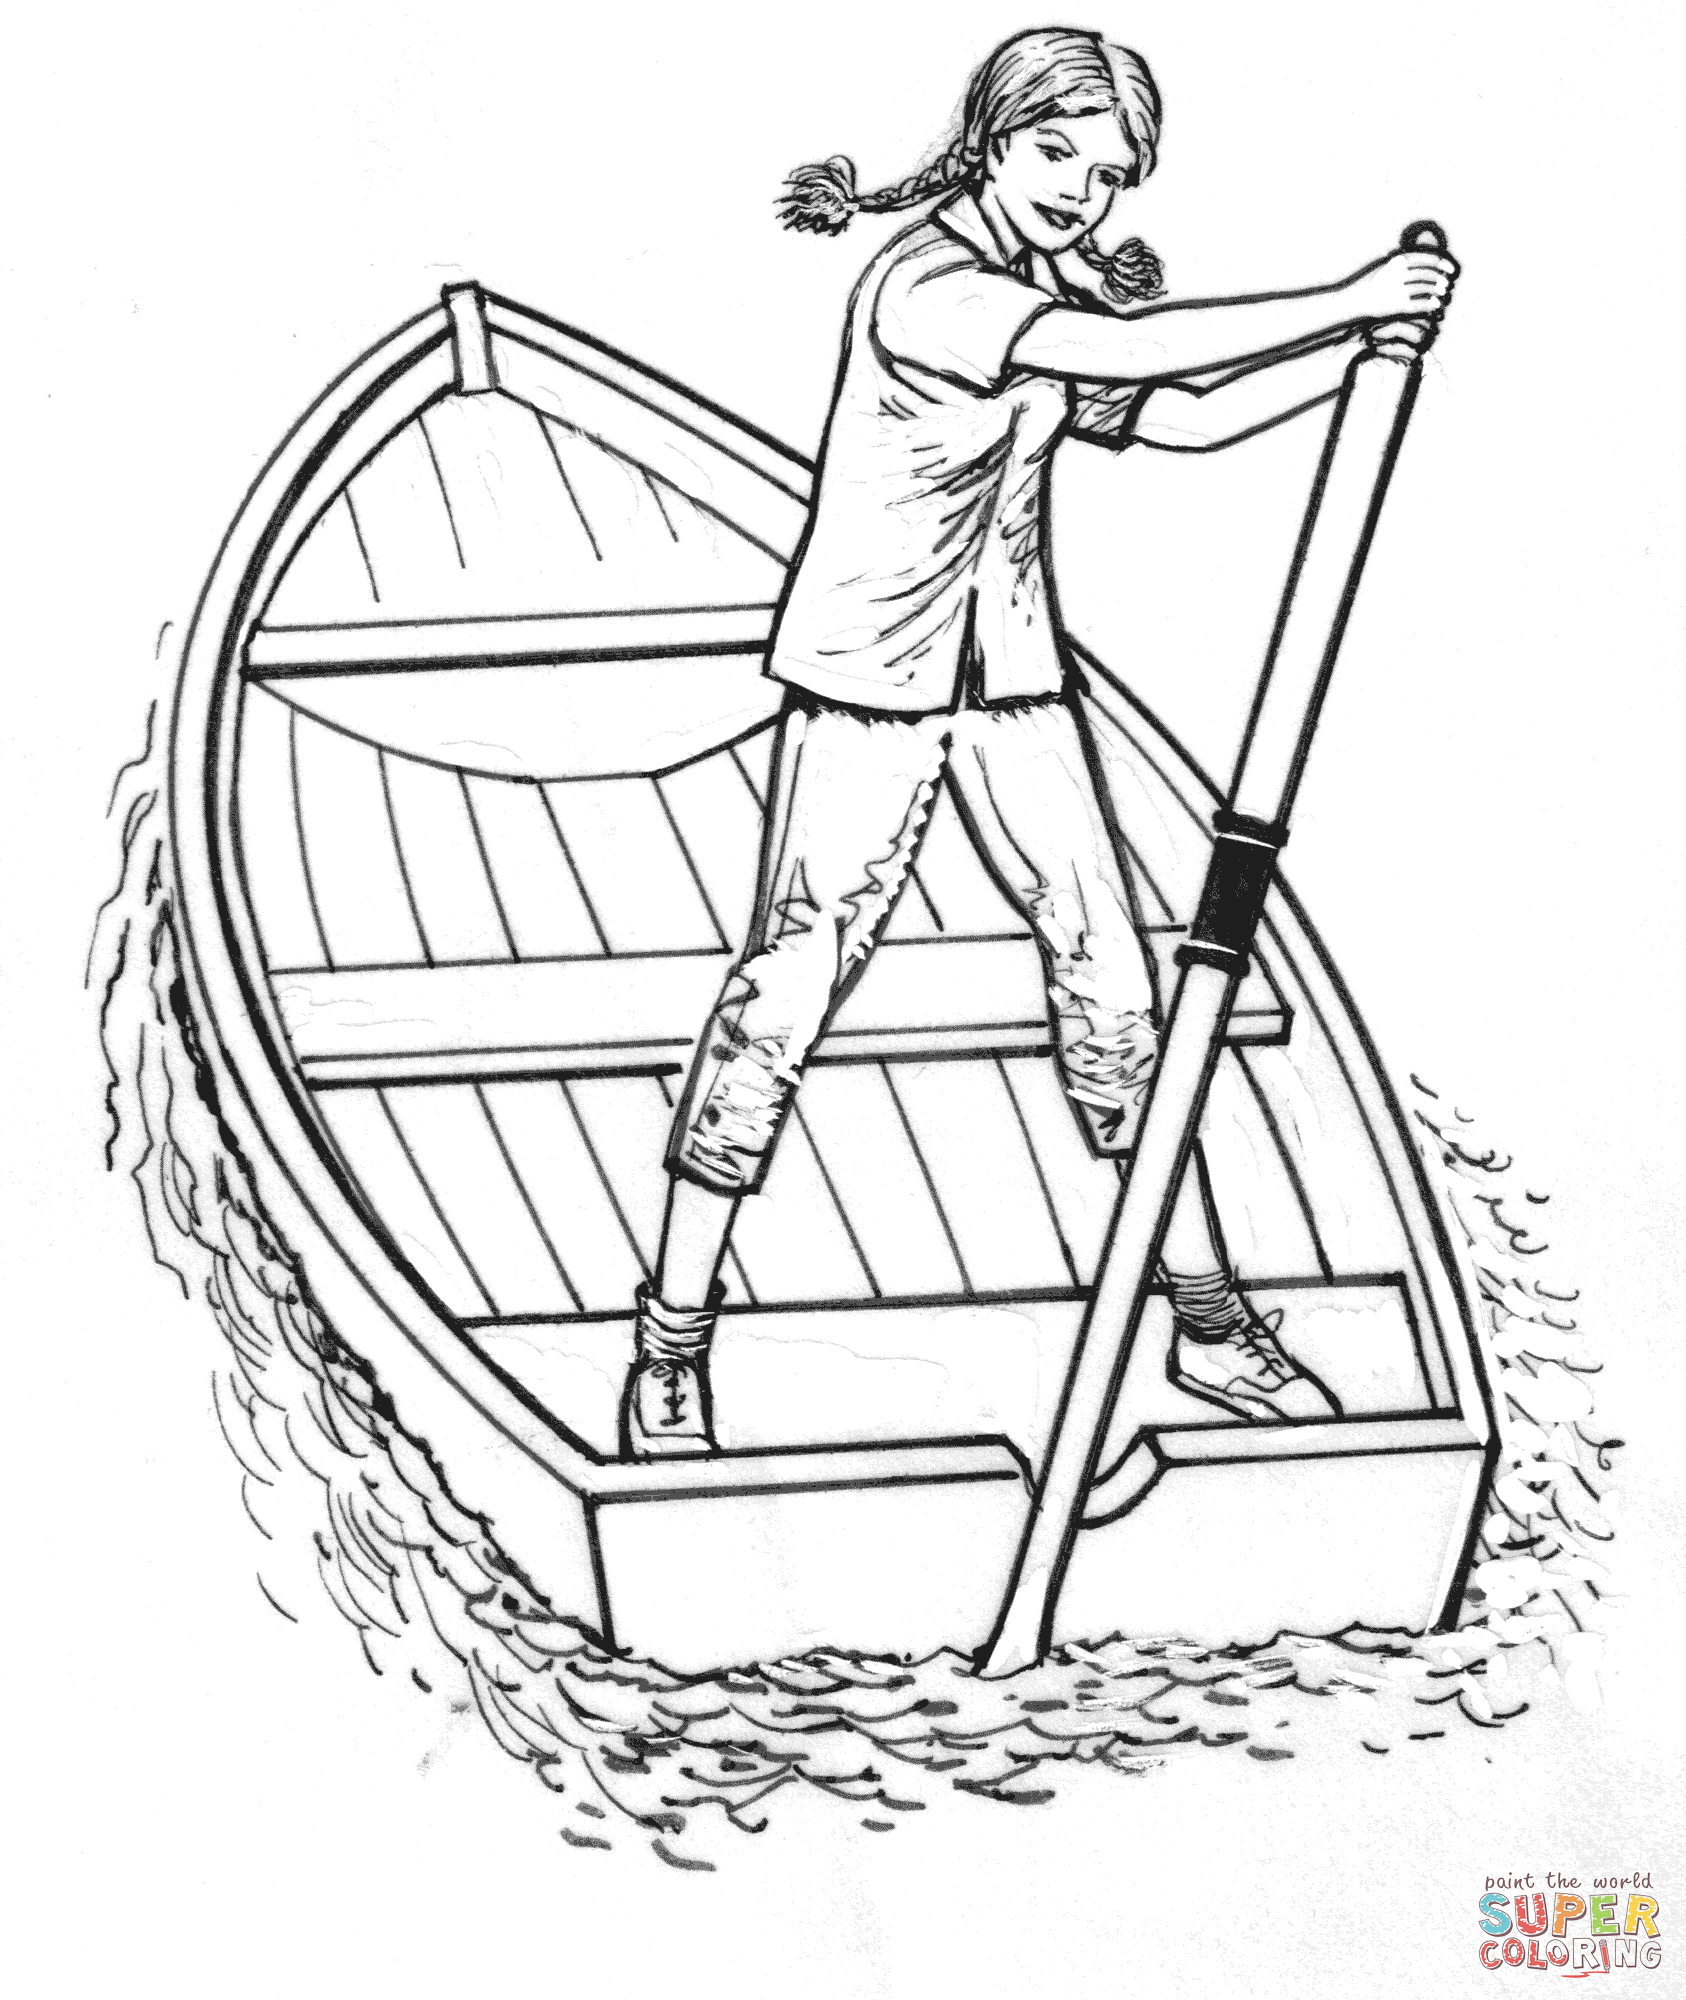 Girl on a Boat coloring page | Free Printable Coloring Pages